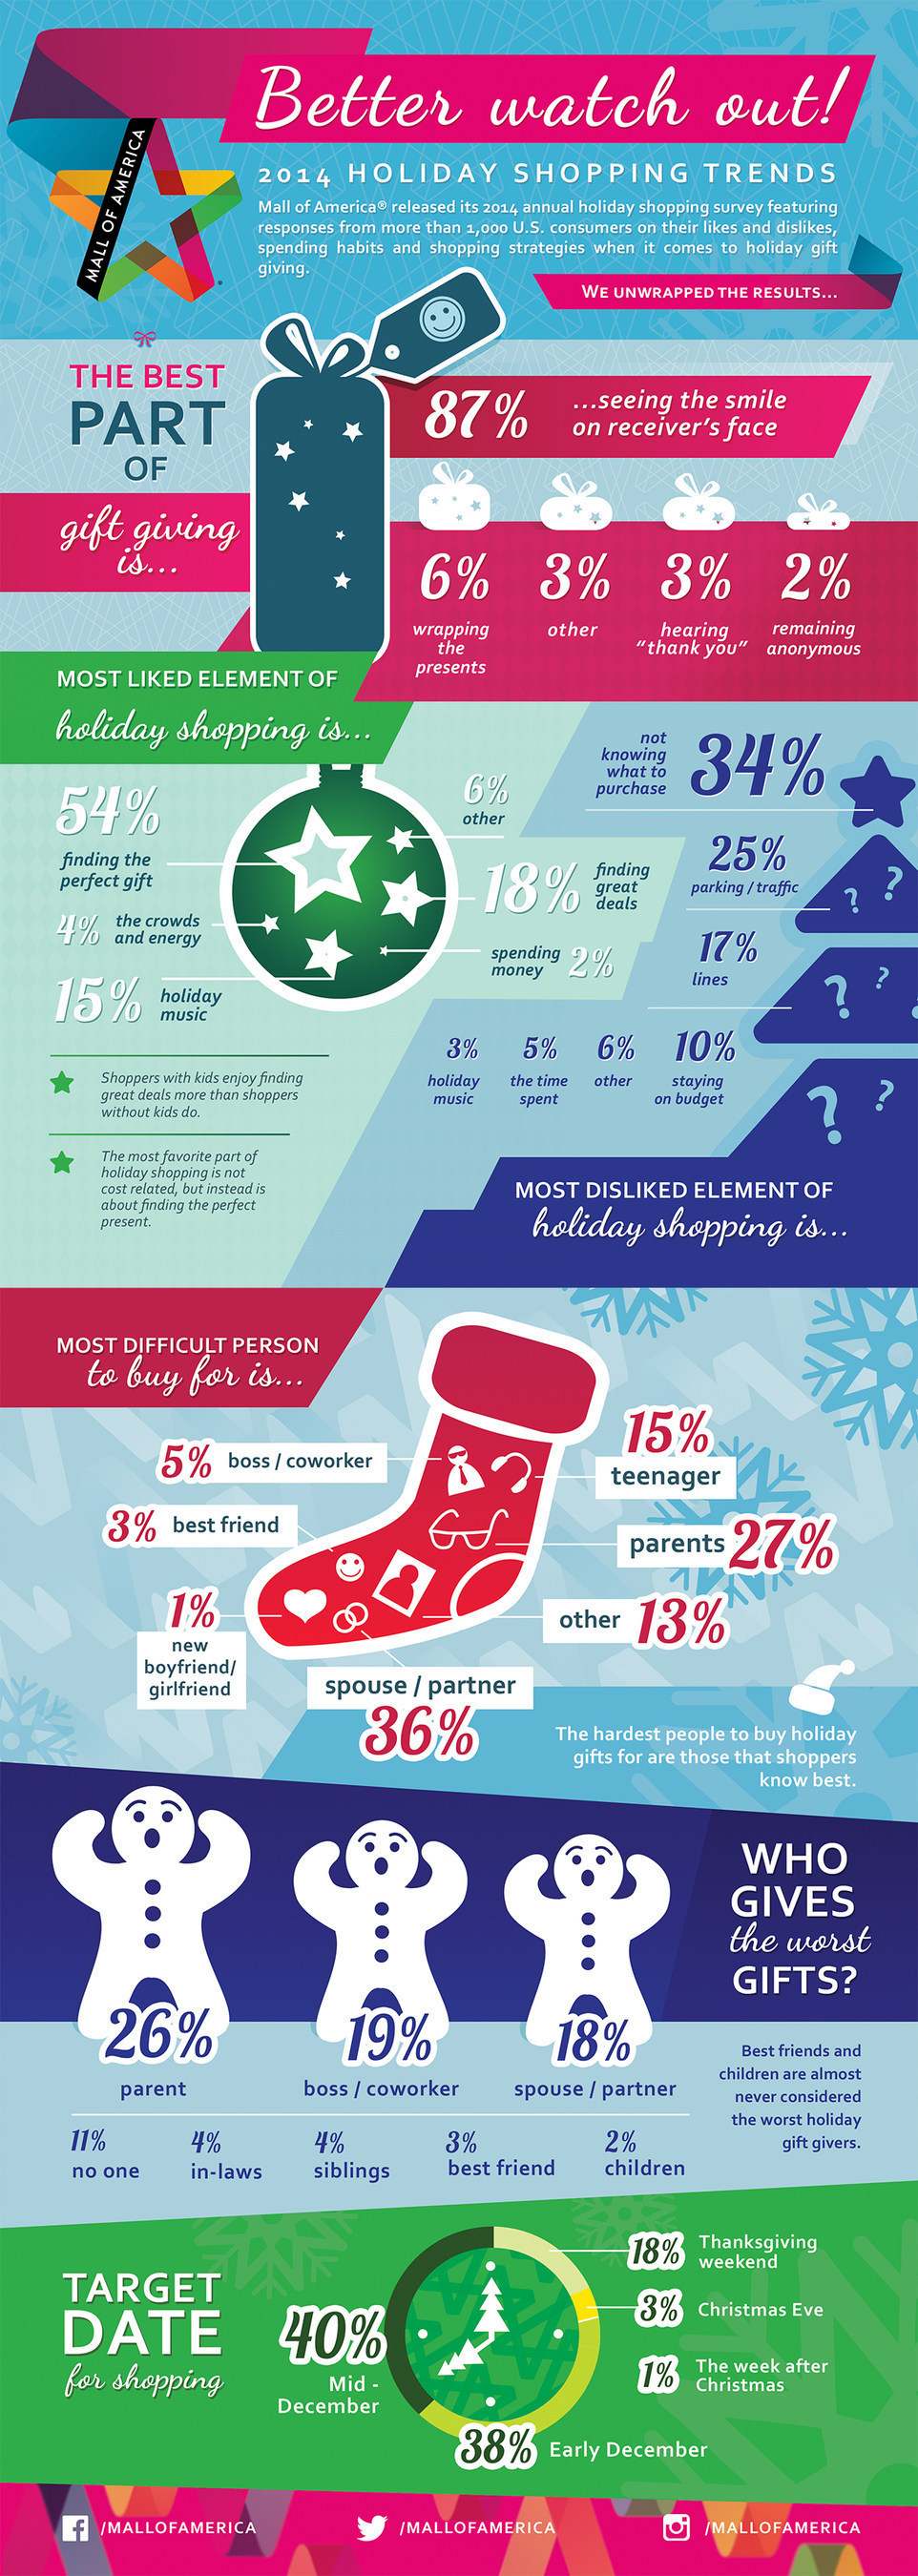 Mall of America released its 2014 holiday shopping survey featuring responses from more than 1,000 U.S. consumers on their likes and dislikes, spending habits and shopping strategies when it comes to holiday gift giving.